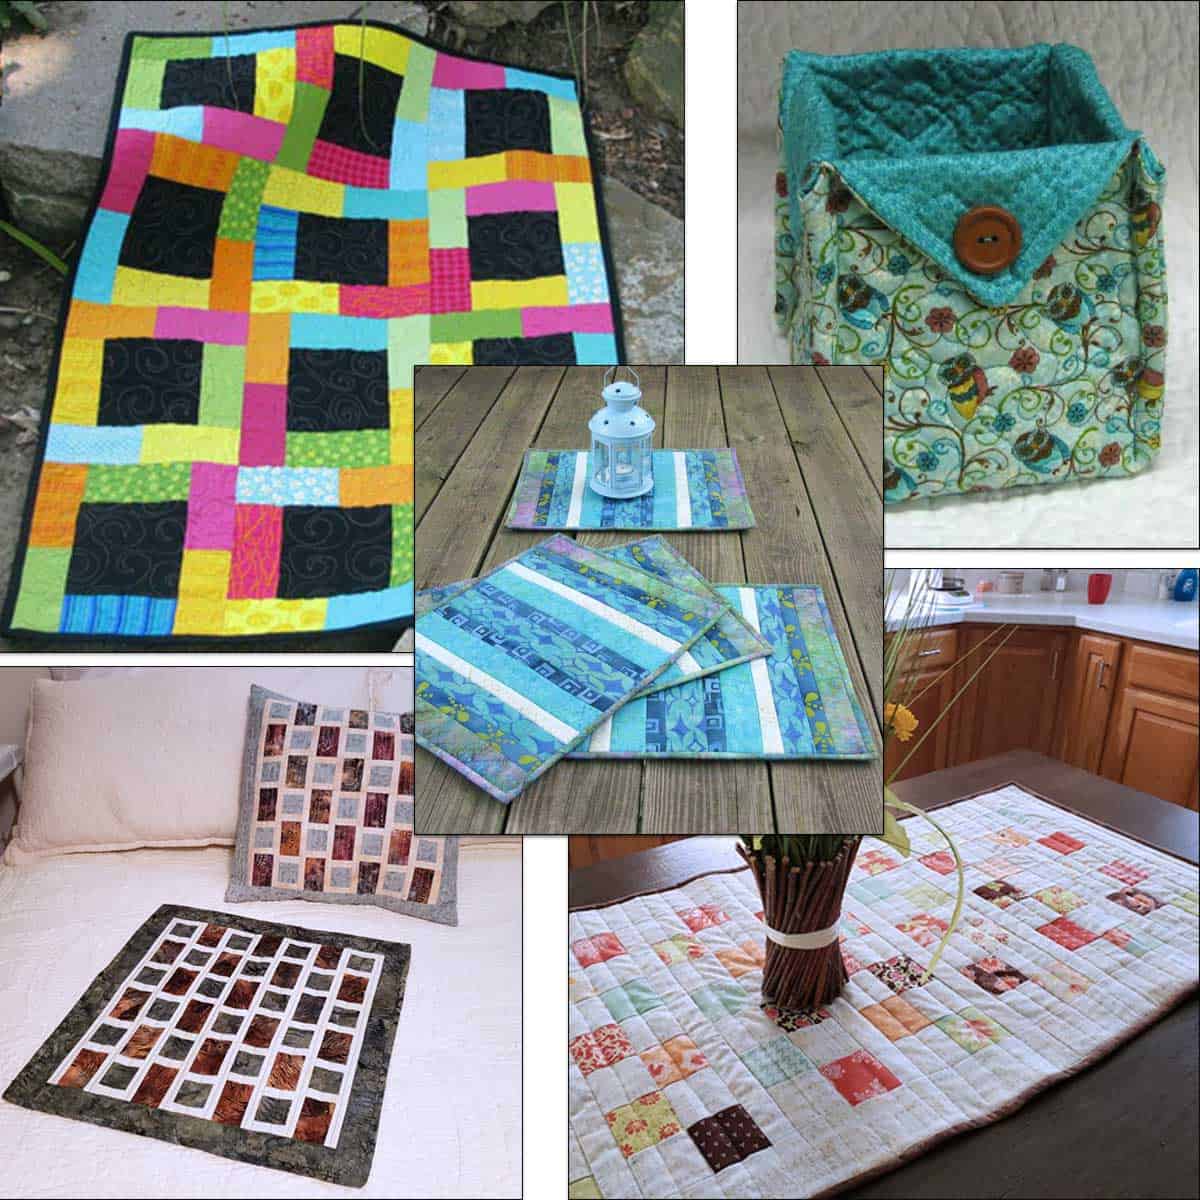 5 quilted gifts that are easy to make!